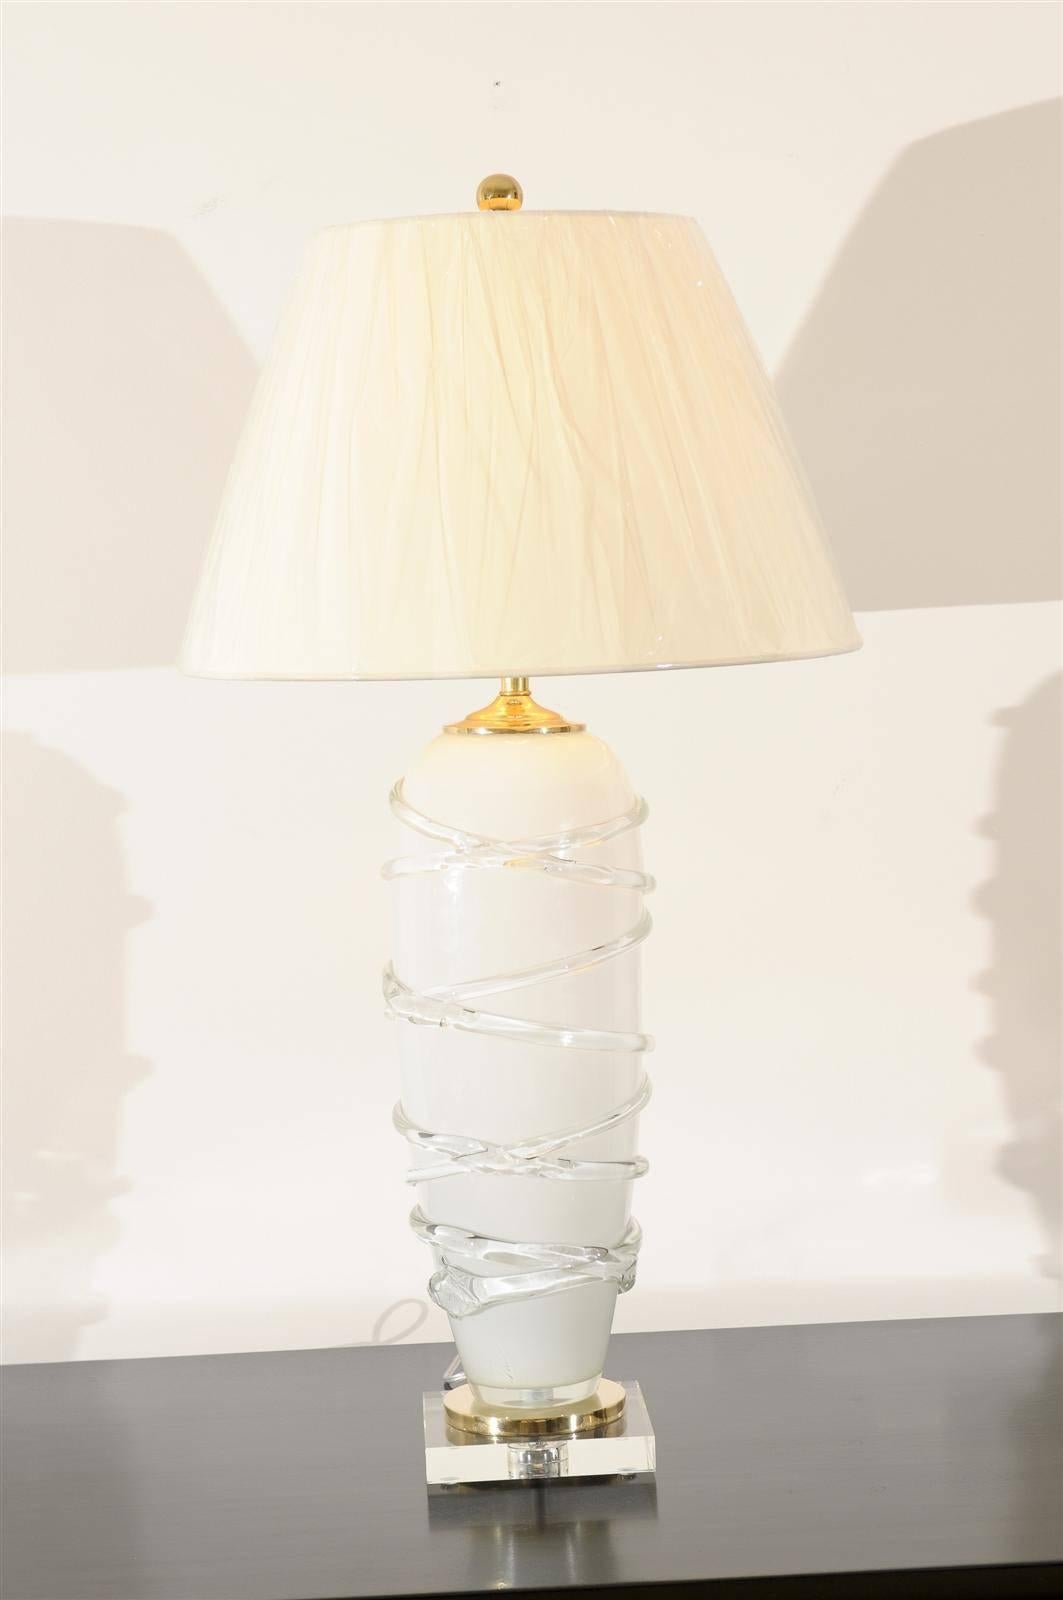 These magnificent lamps have been professionally restored and are shipped as professionally photographed and described. Complete with new shades, harps and finials.

A stunning pair of cream opaque blown glass lamps, circa 1980. Beautiful glass